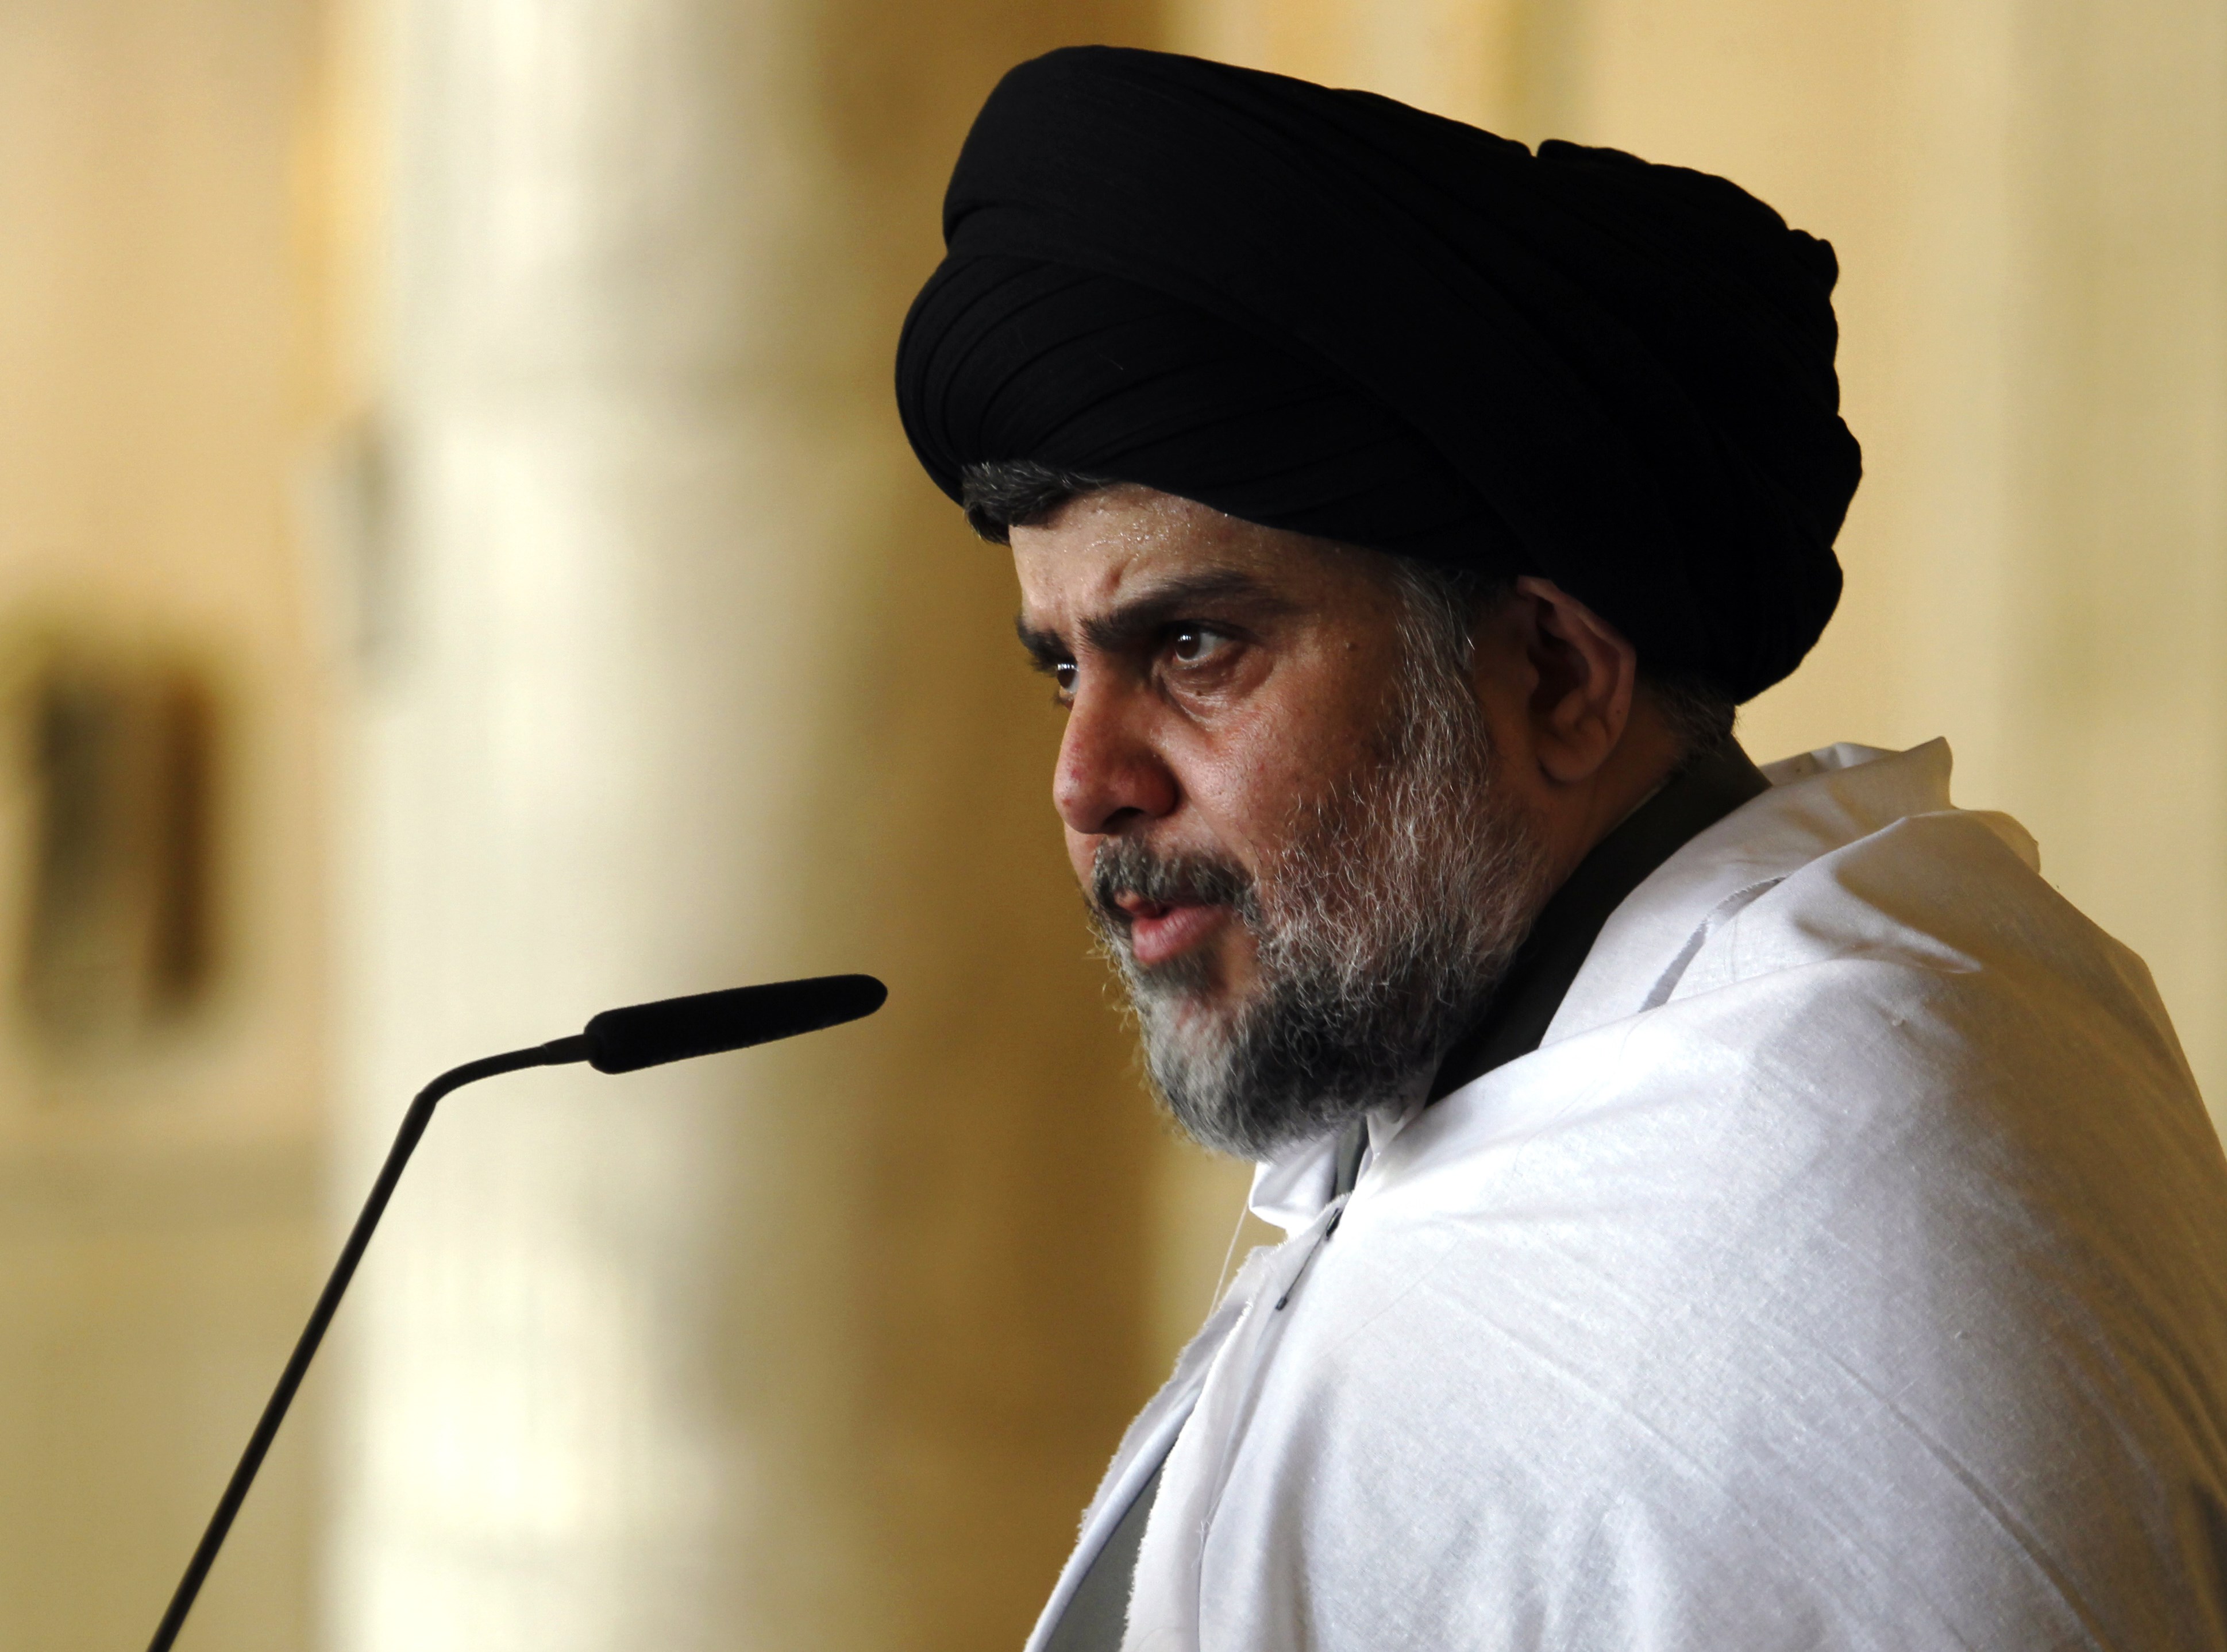 Iraqi Shiite cleric Moqtada al-Sadr delivers a speech to his supporters following Friday prayers at the grand mosque of Kufa in the holy city of Najaf, on April 3, 2015. (HAIDAR HAMDANI—AFP/Getty Images)